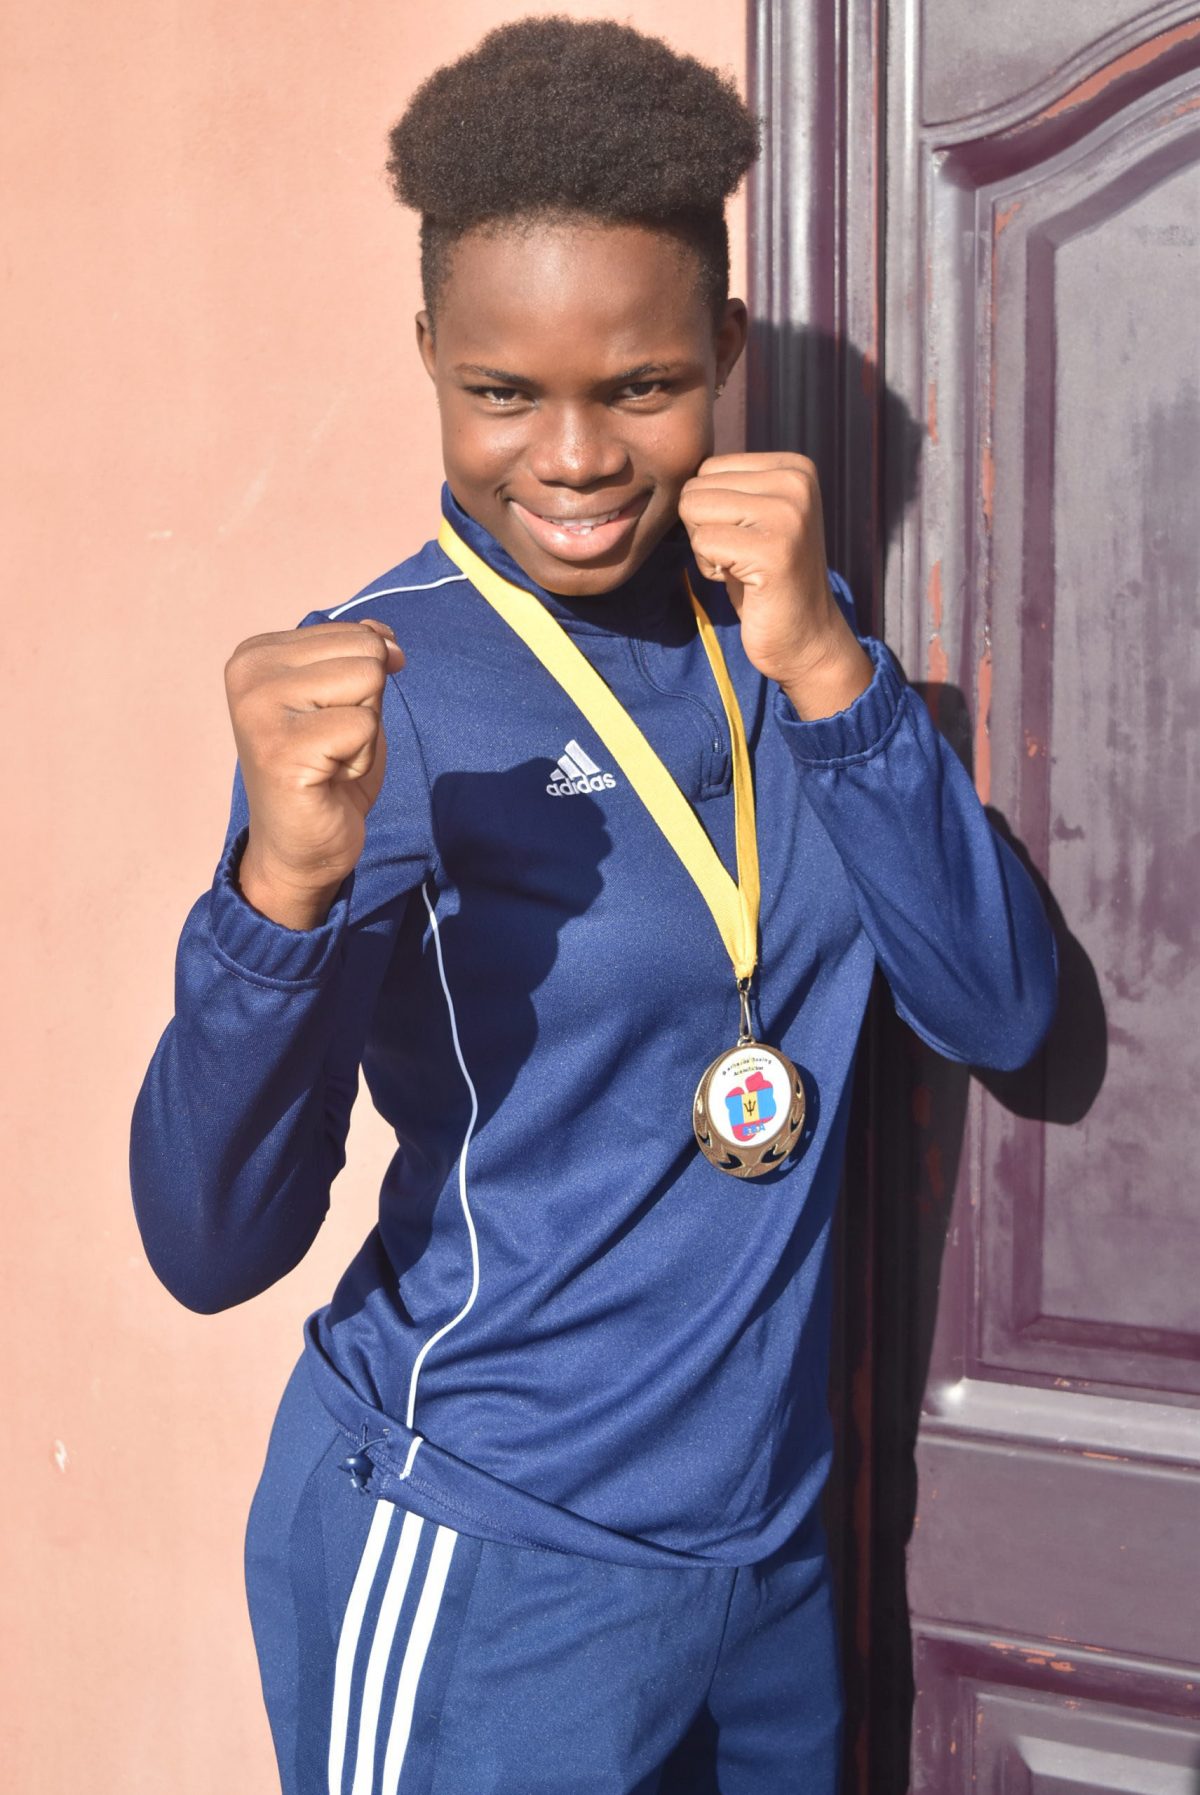 Guyana’s Abiola Jackman won the Best Elite Female Boxer award at the recently concluded Organisation of Eastern Caribbean States (OECS) ‘Champion of Champions’ Boxing Tournament which was staged in St. Lucia.
